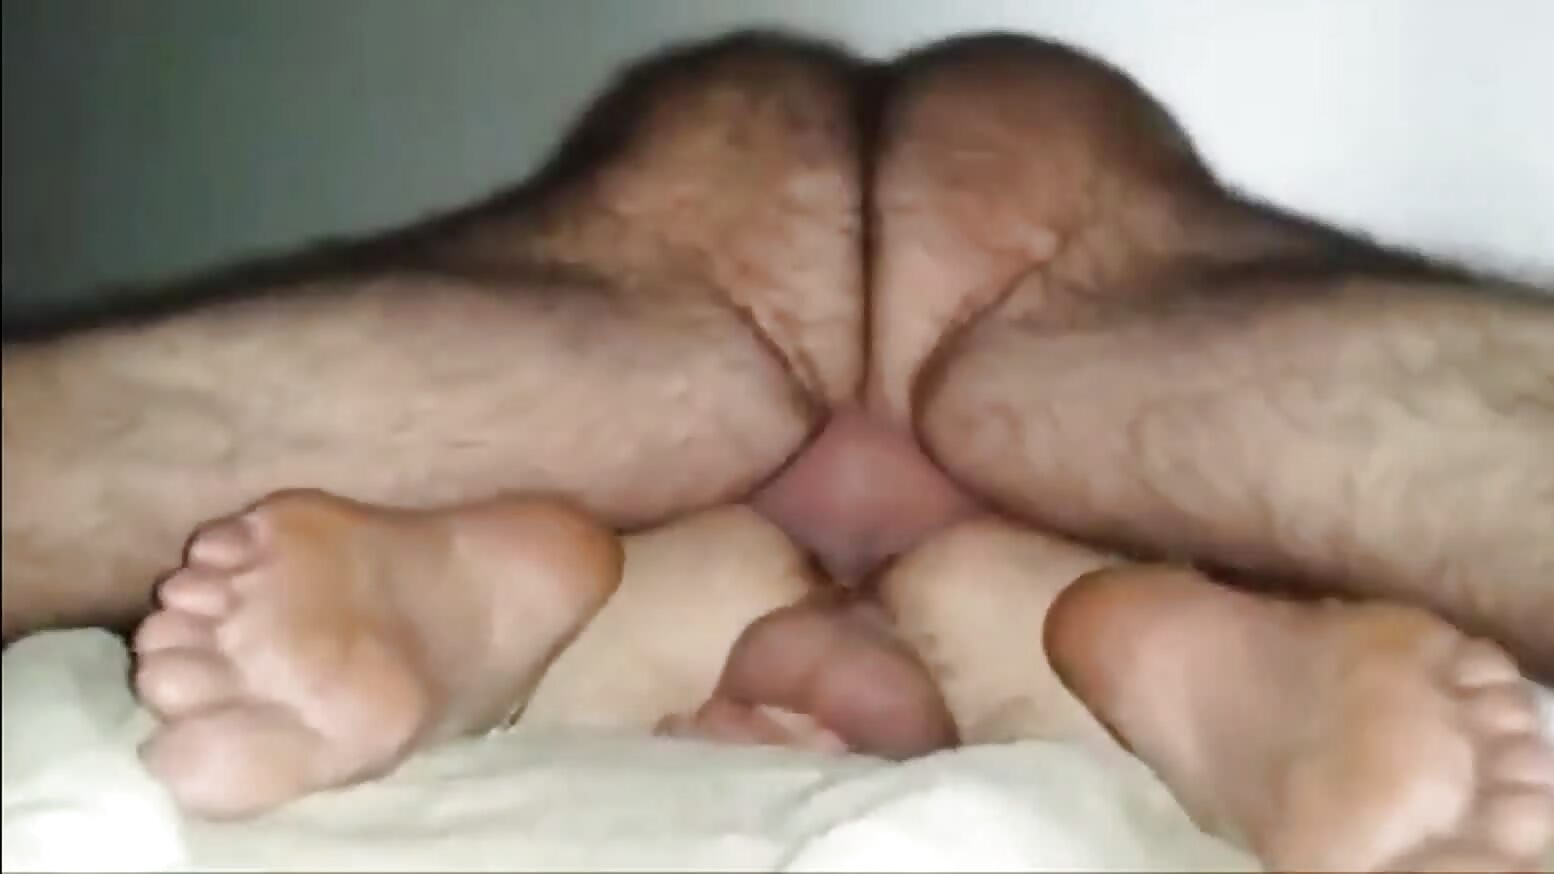 Hairy daddy with hairy legs breeds boy from below